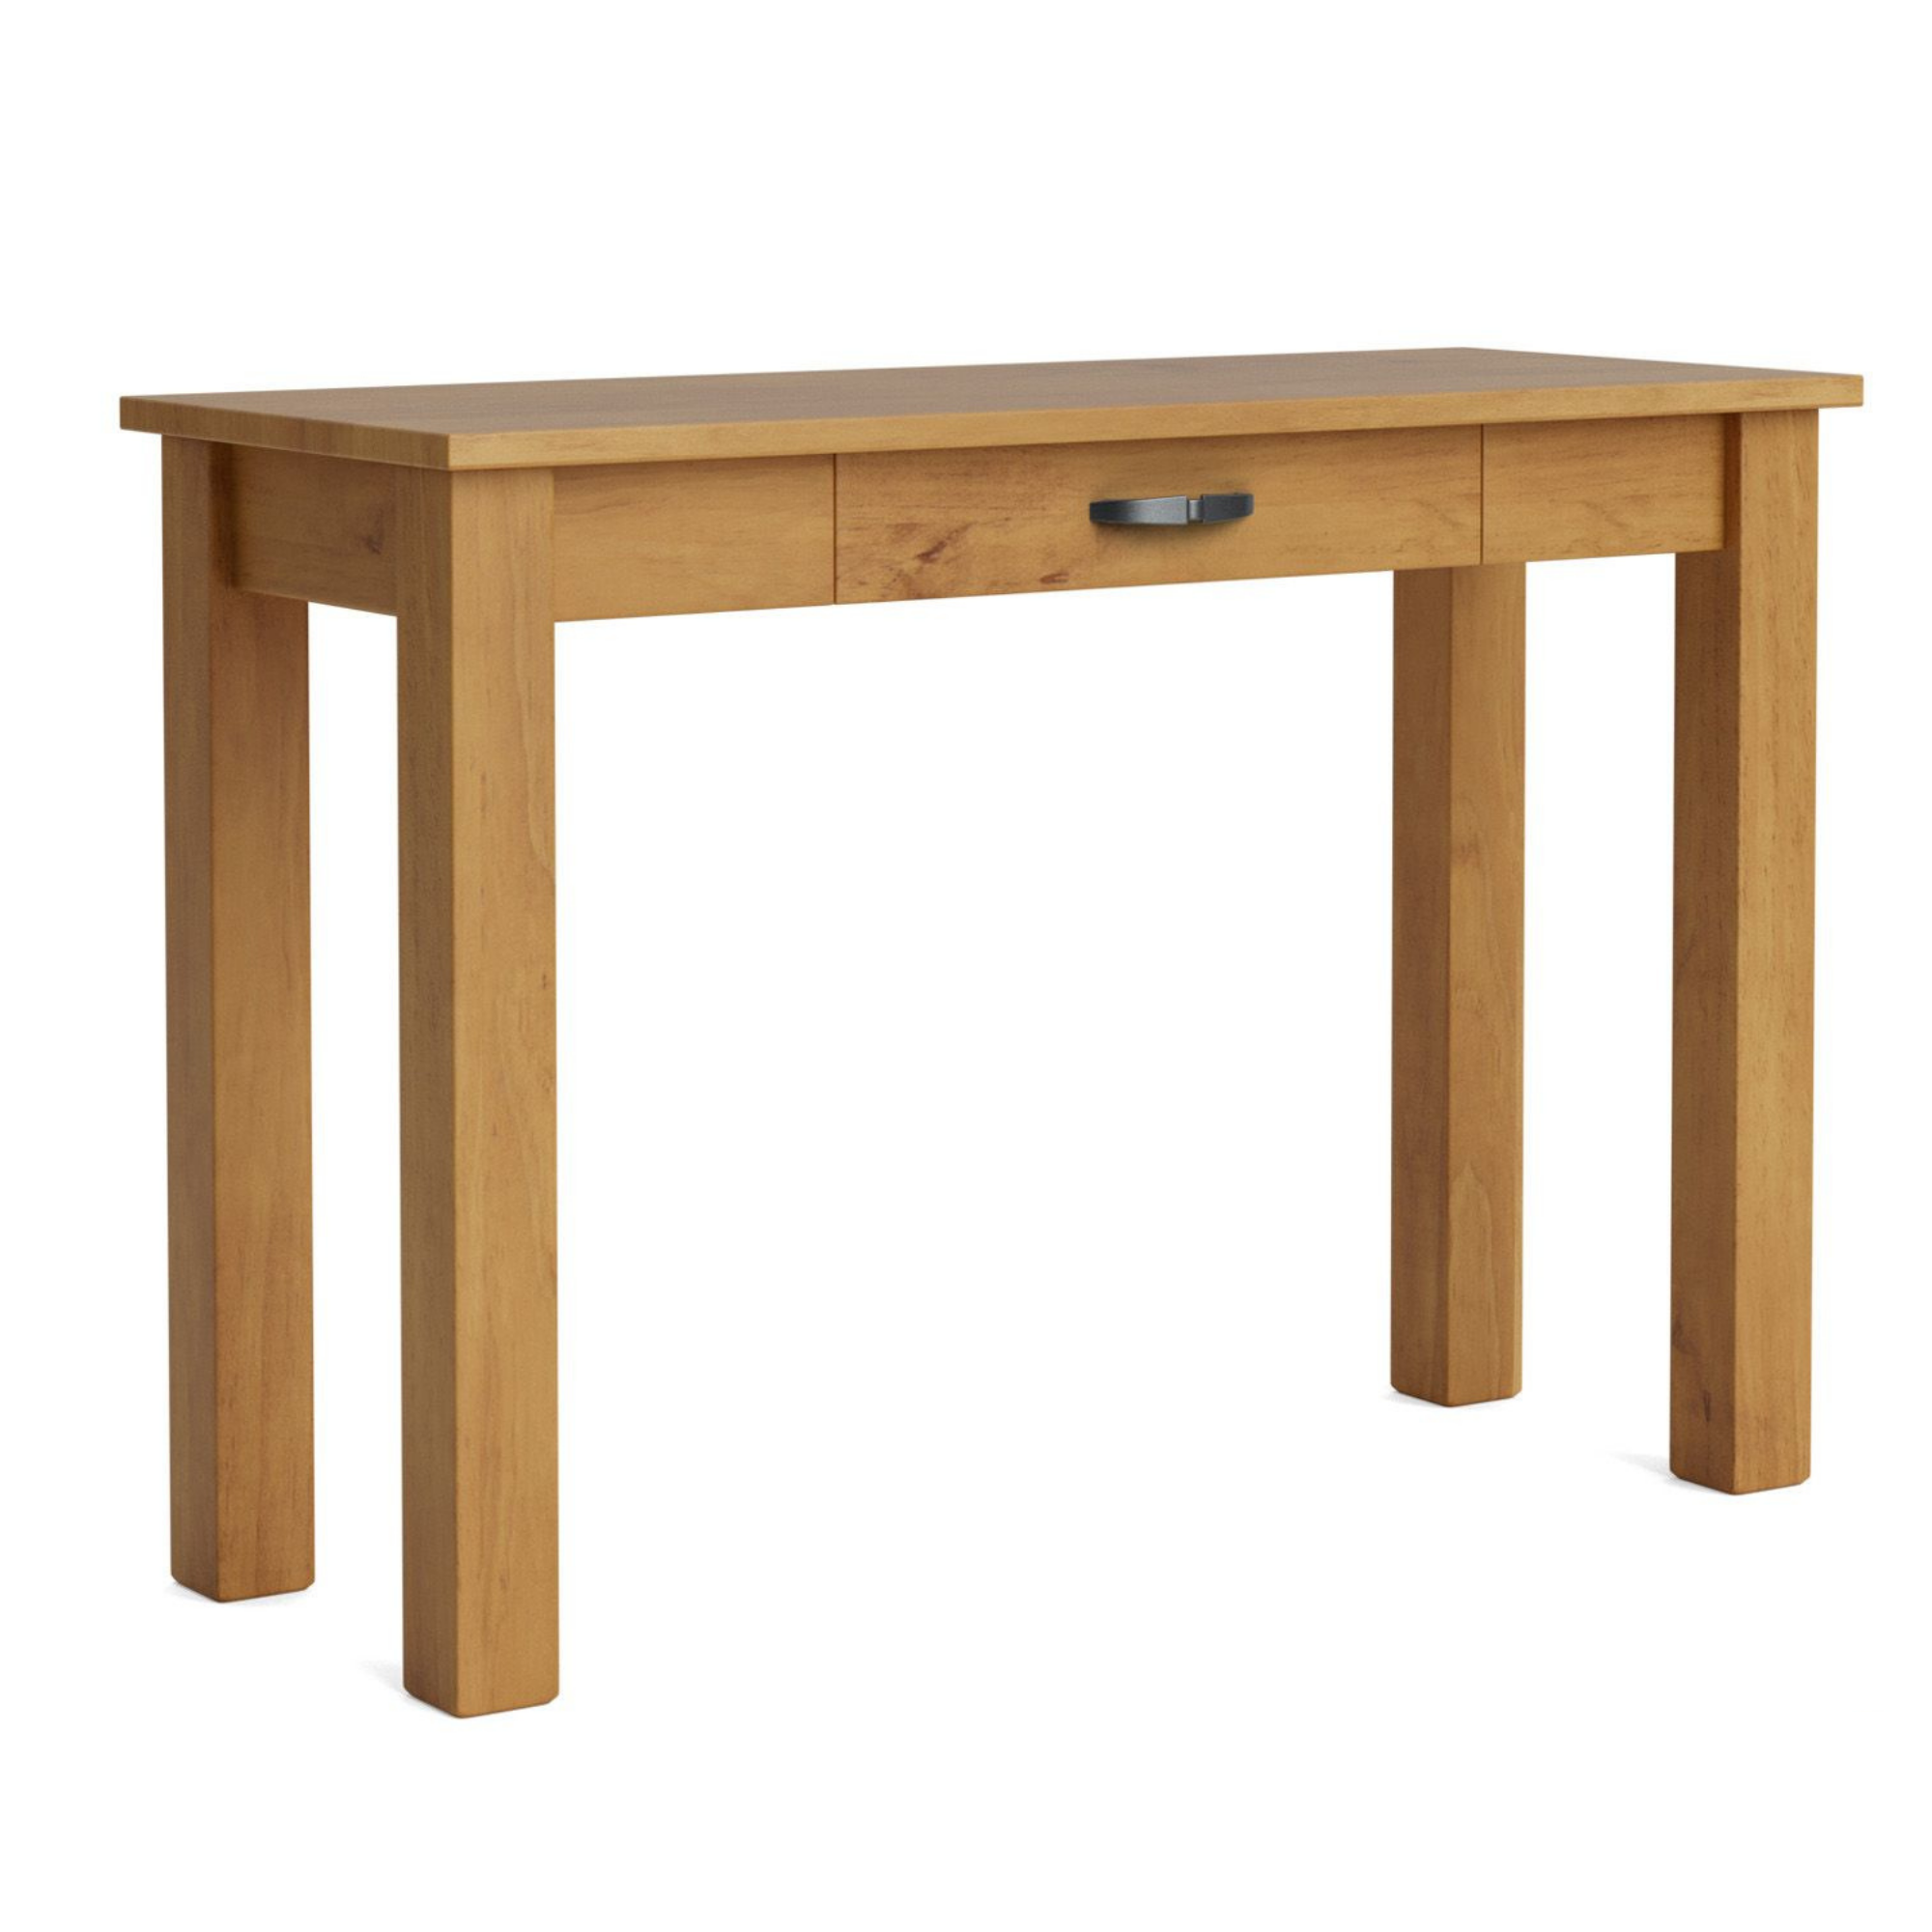 CHARLTON HALL TABLE WITH A DRAWER | NZ MADE